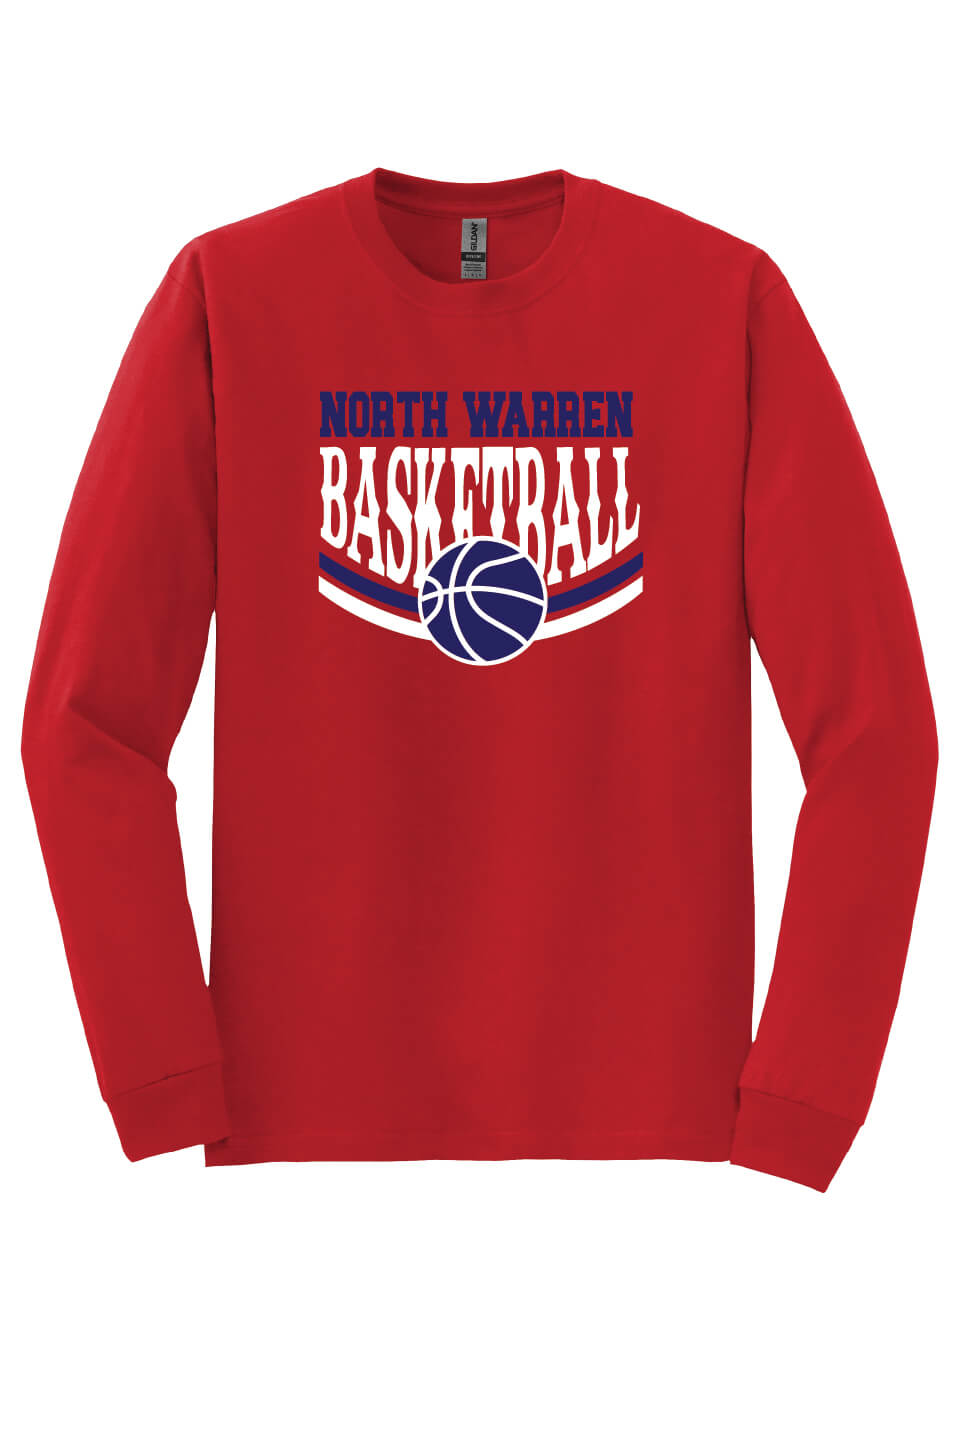 NW Basketball Long Sleeve T-Shirt (Youth) red